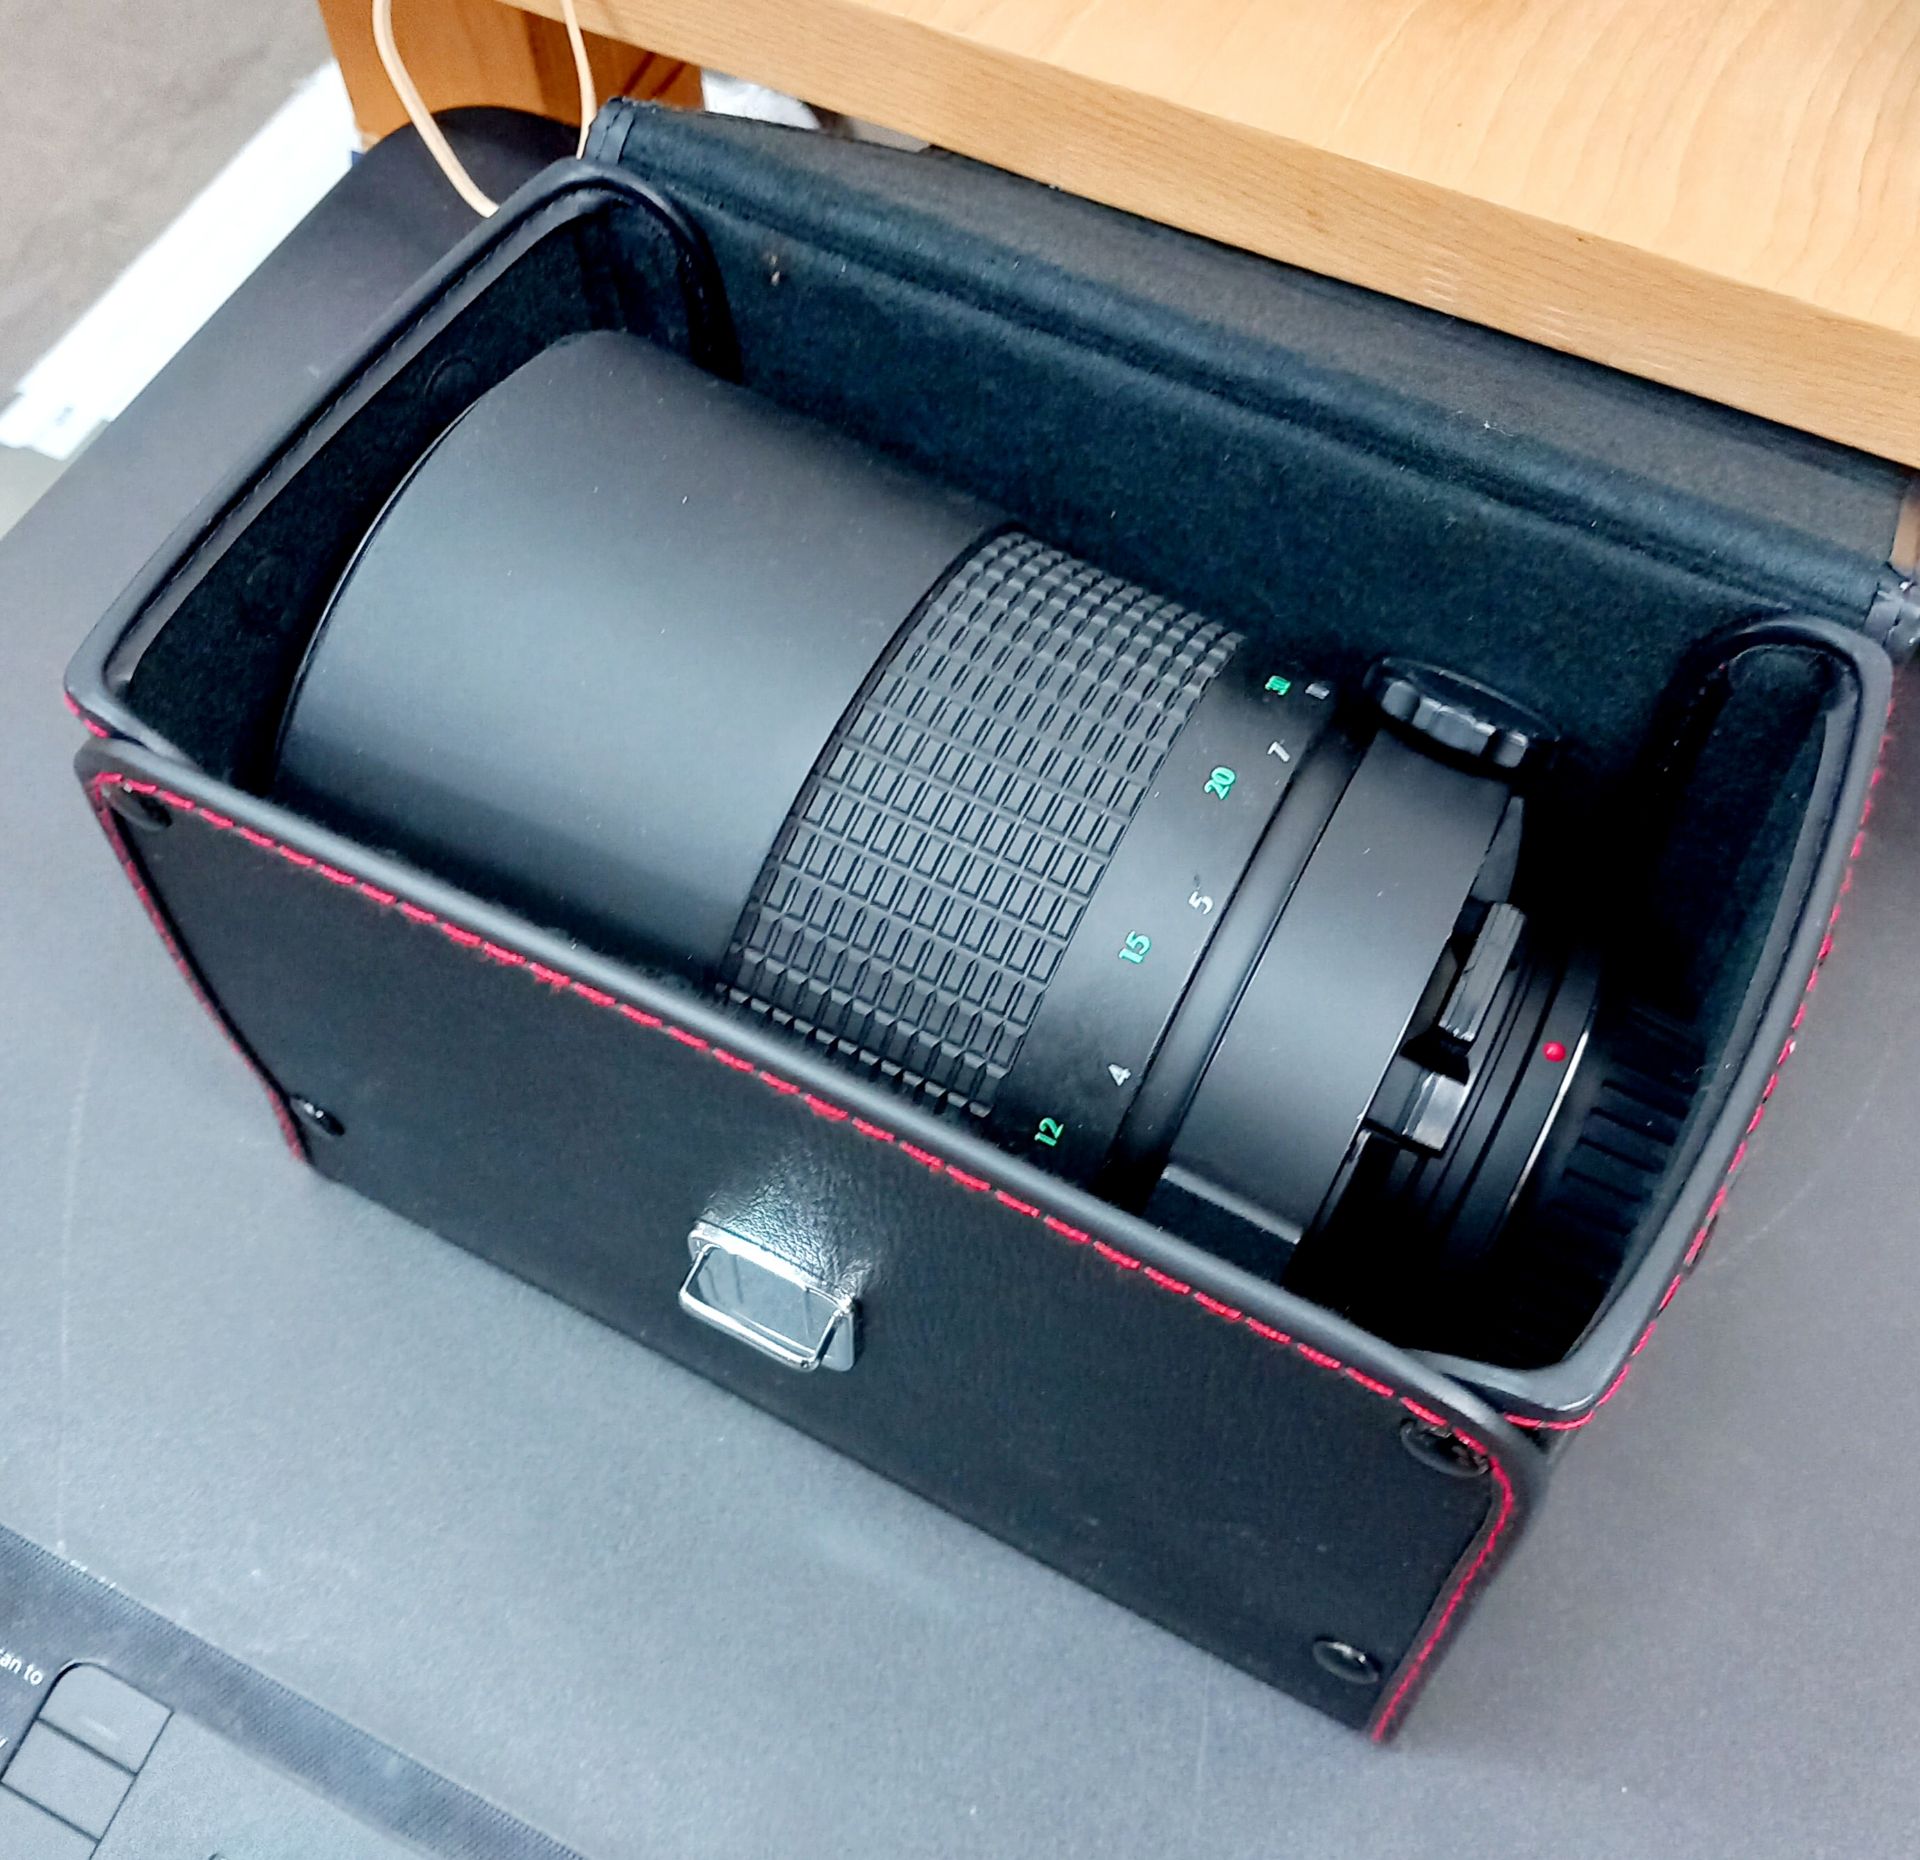 Sigma 600mm mirror lens, Sony fit to case